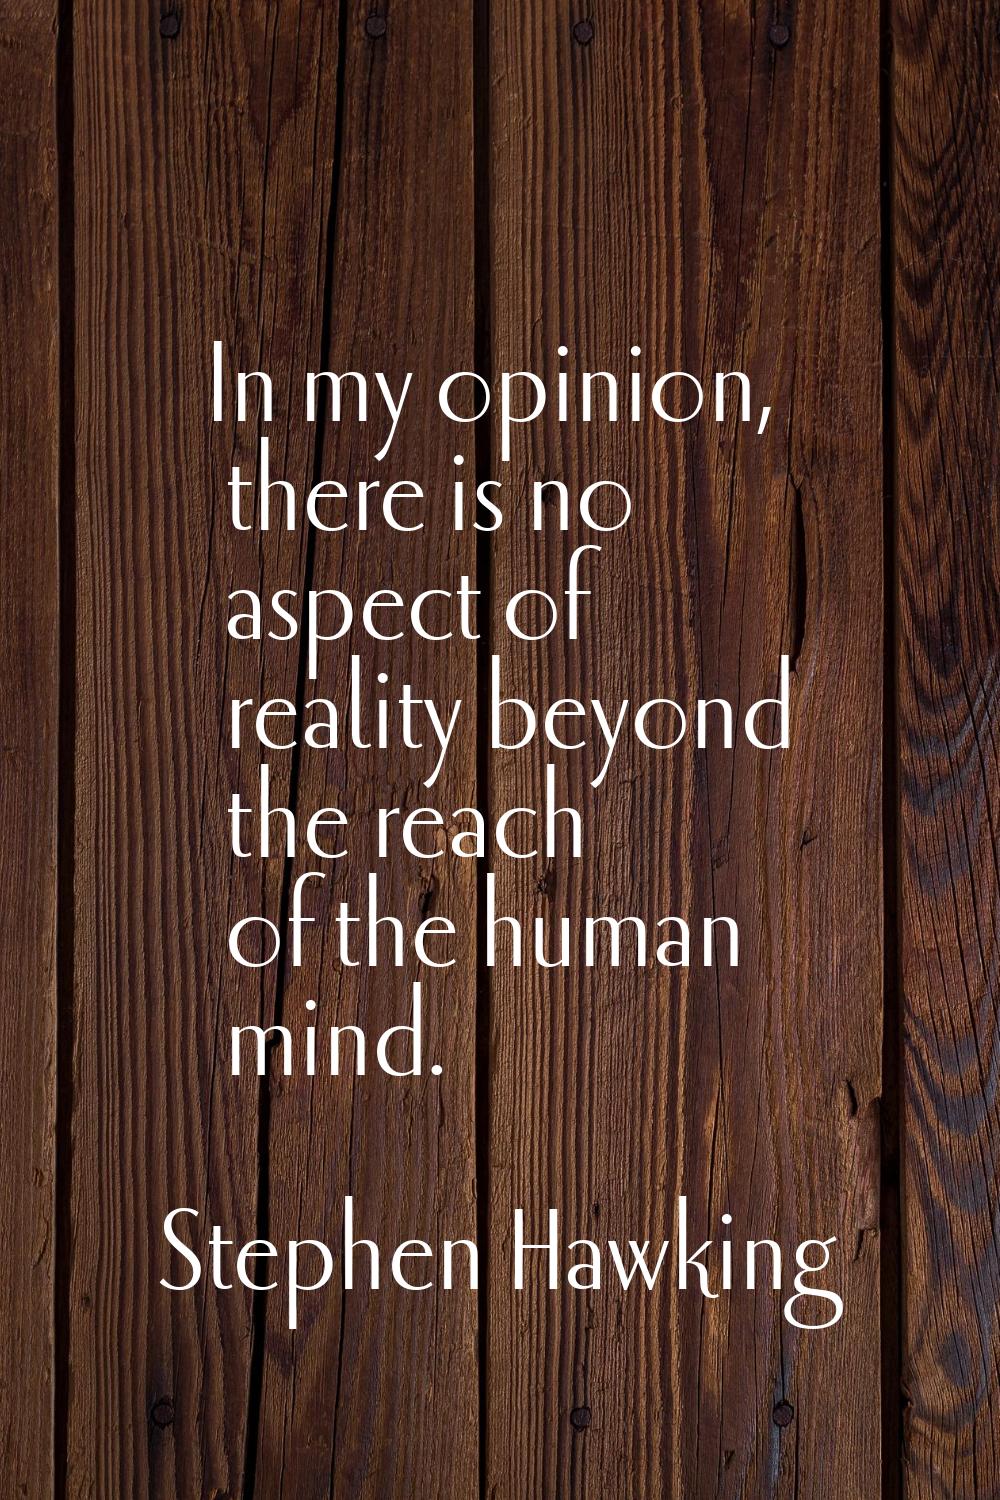 In my opinion, there is no aspect of reality beyond the reach of the human mind.